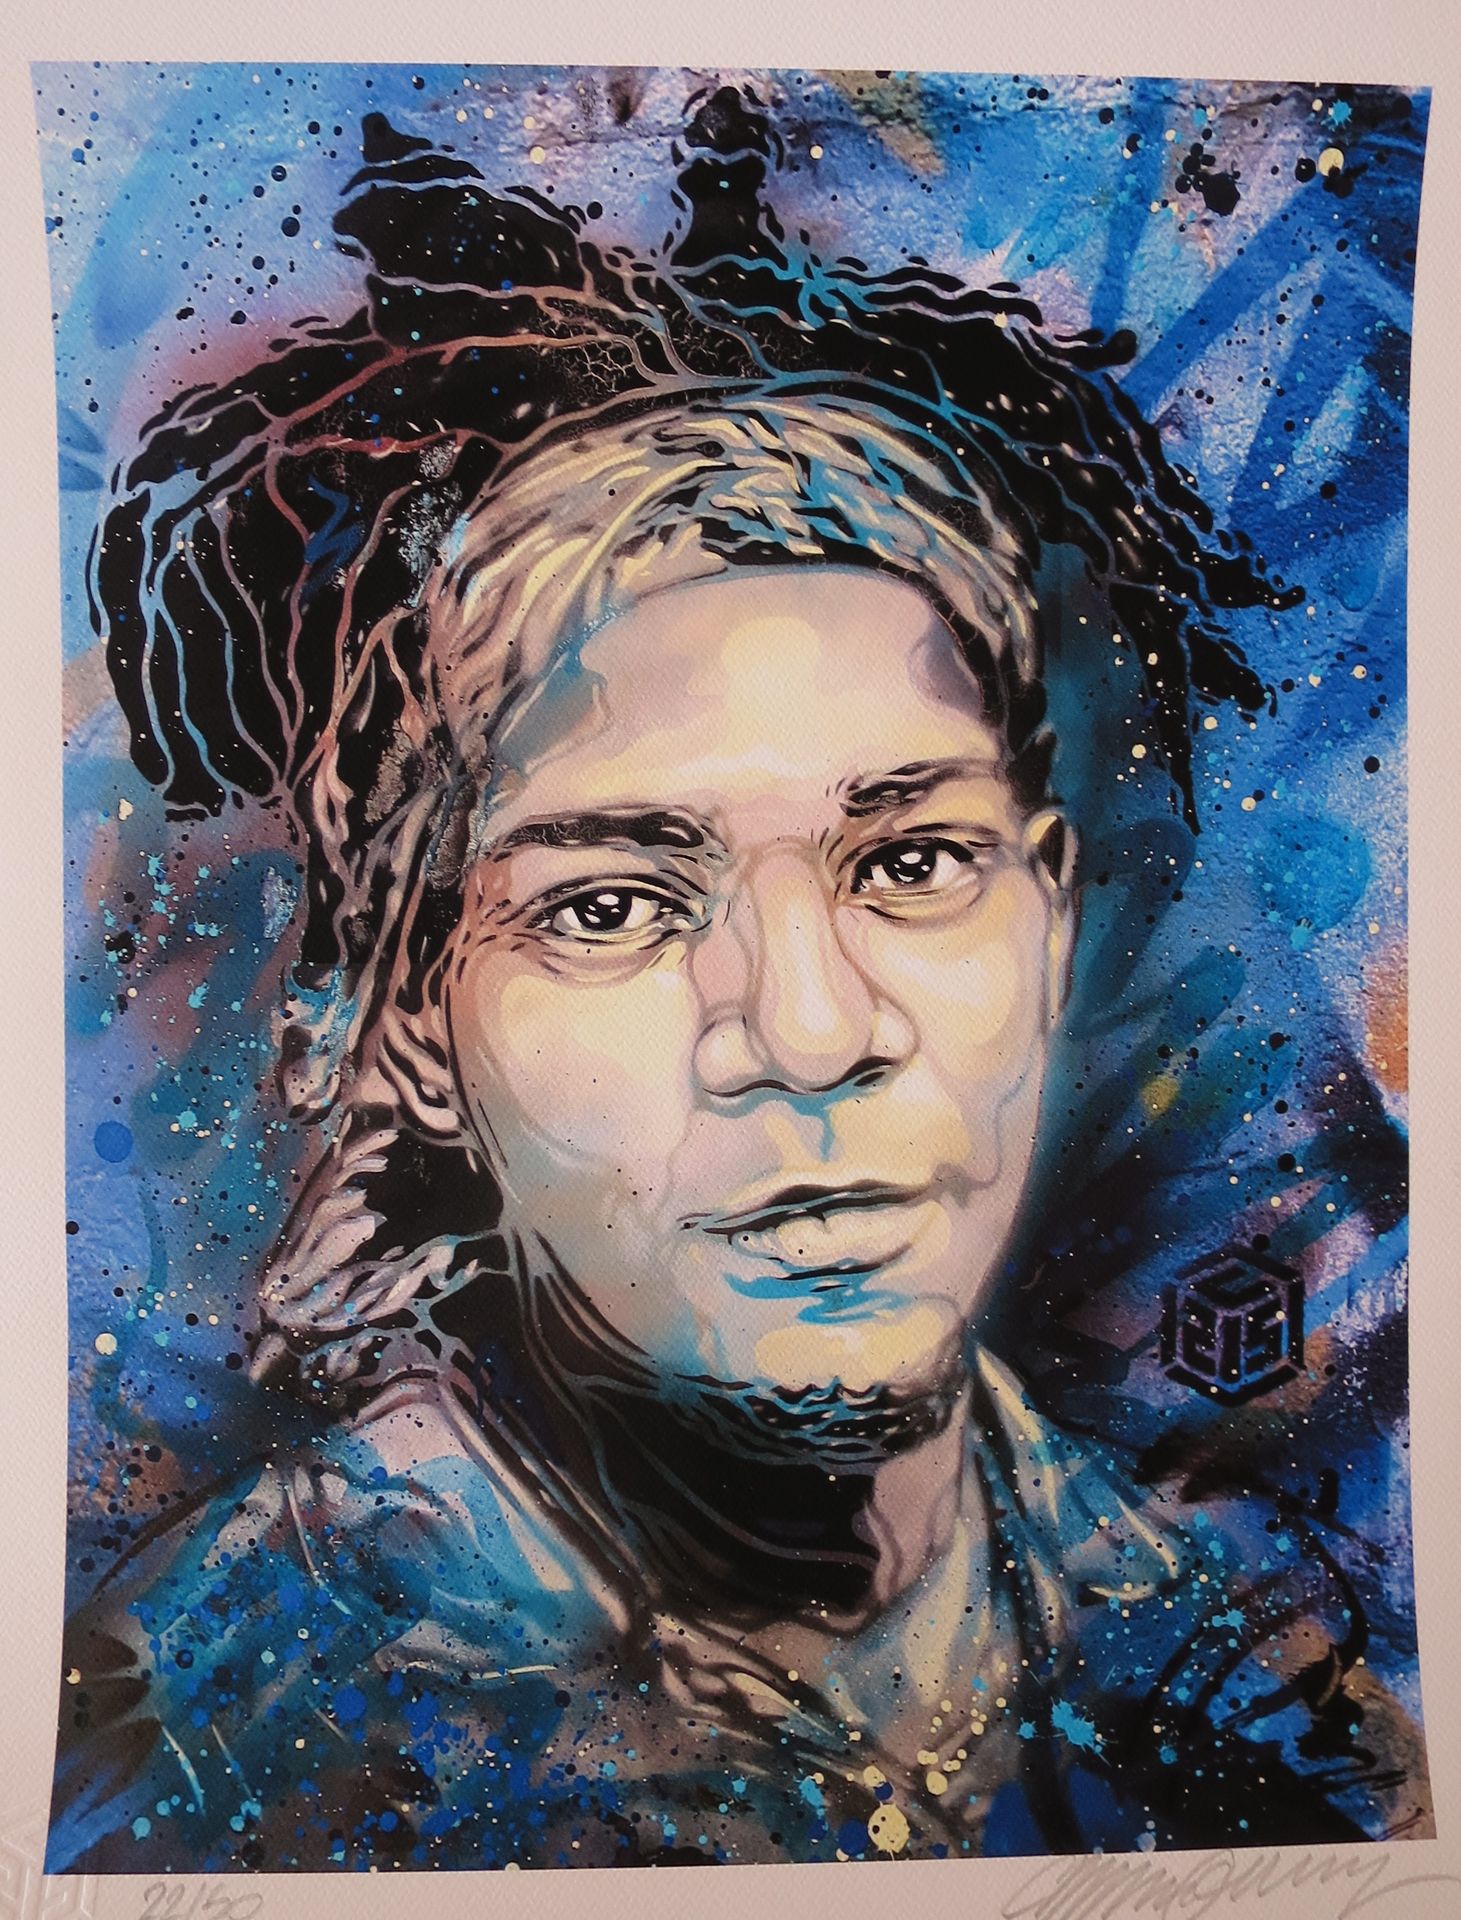 C215 C215

2020

Digital printing on Canson paper.

Hand signed by C215

Dimensi&hellip;